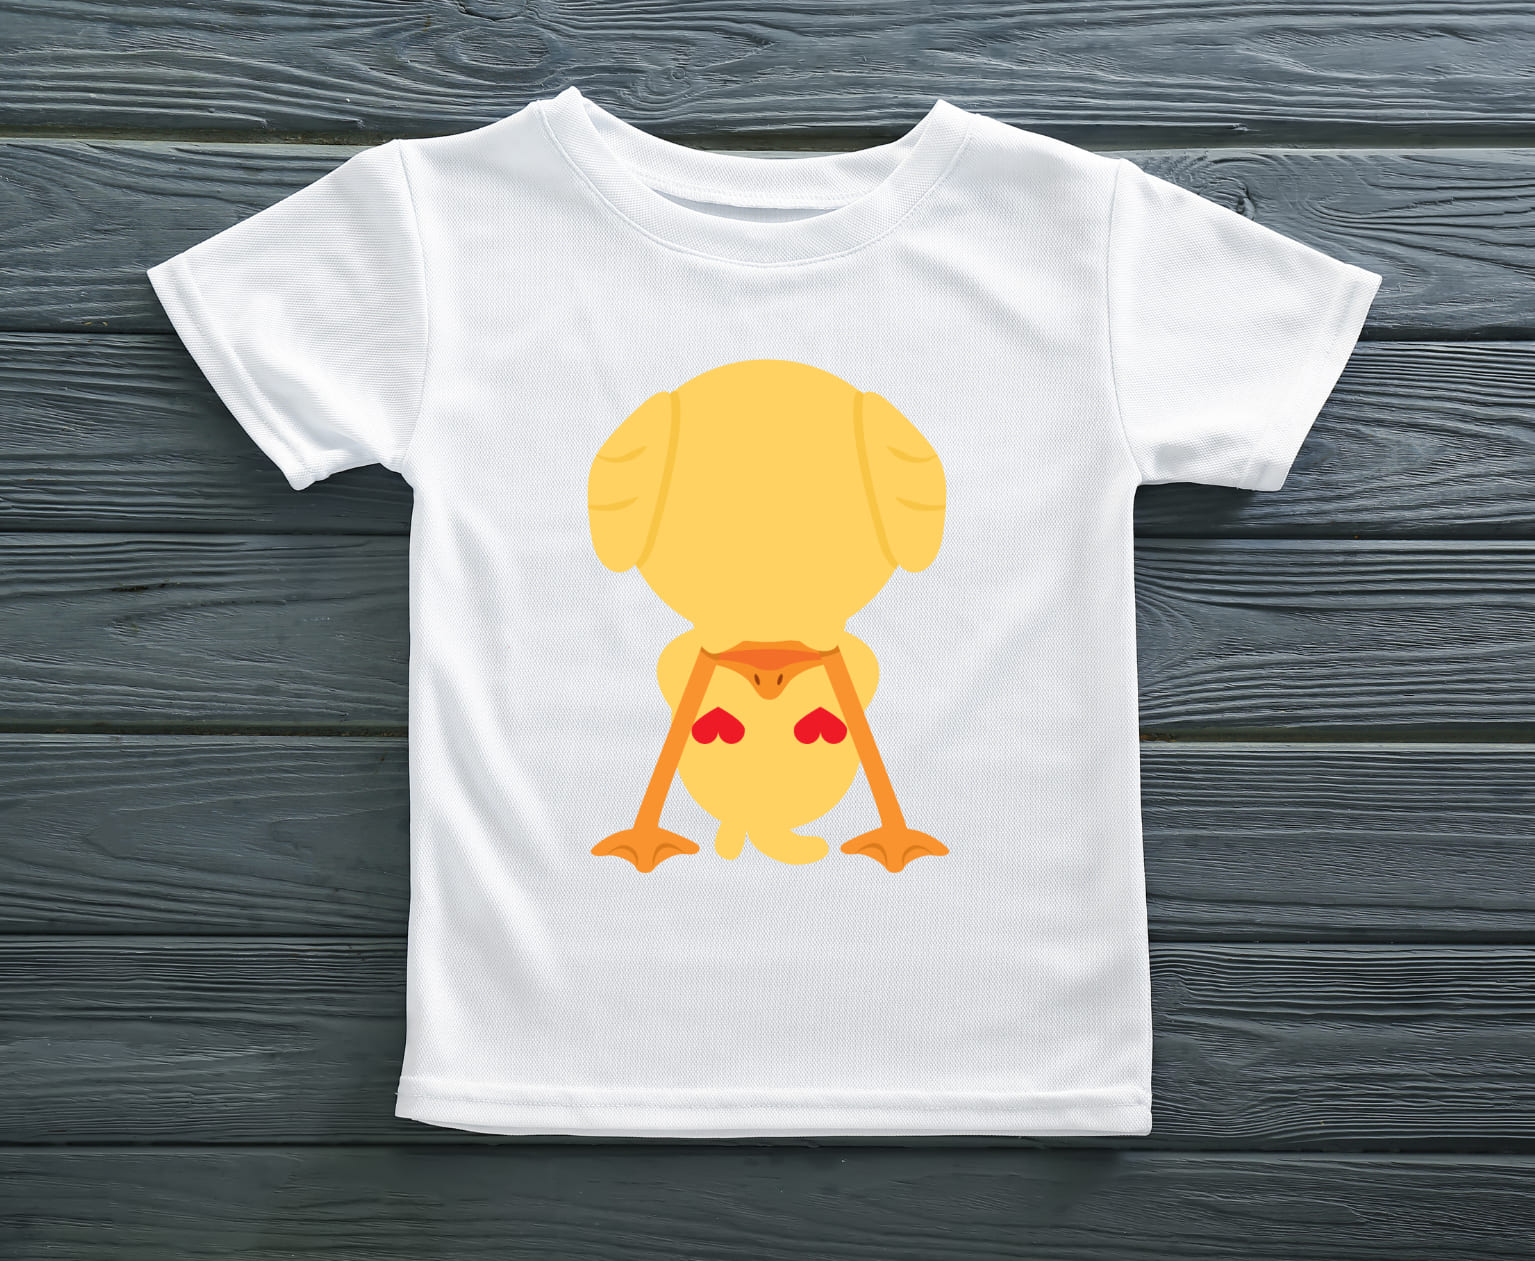 Image of white t-shirt with colorful print of a cute duck.